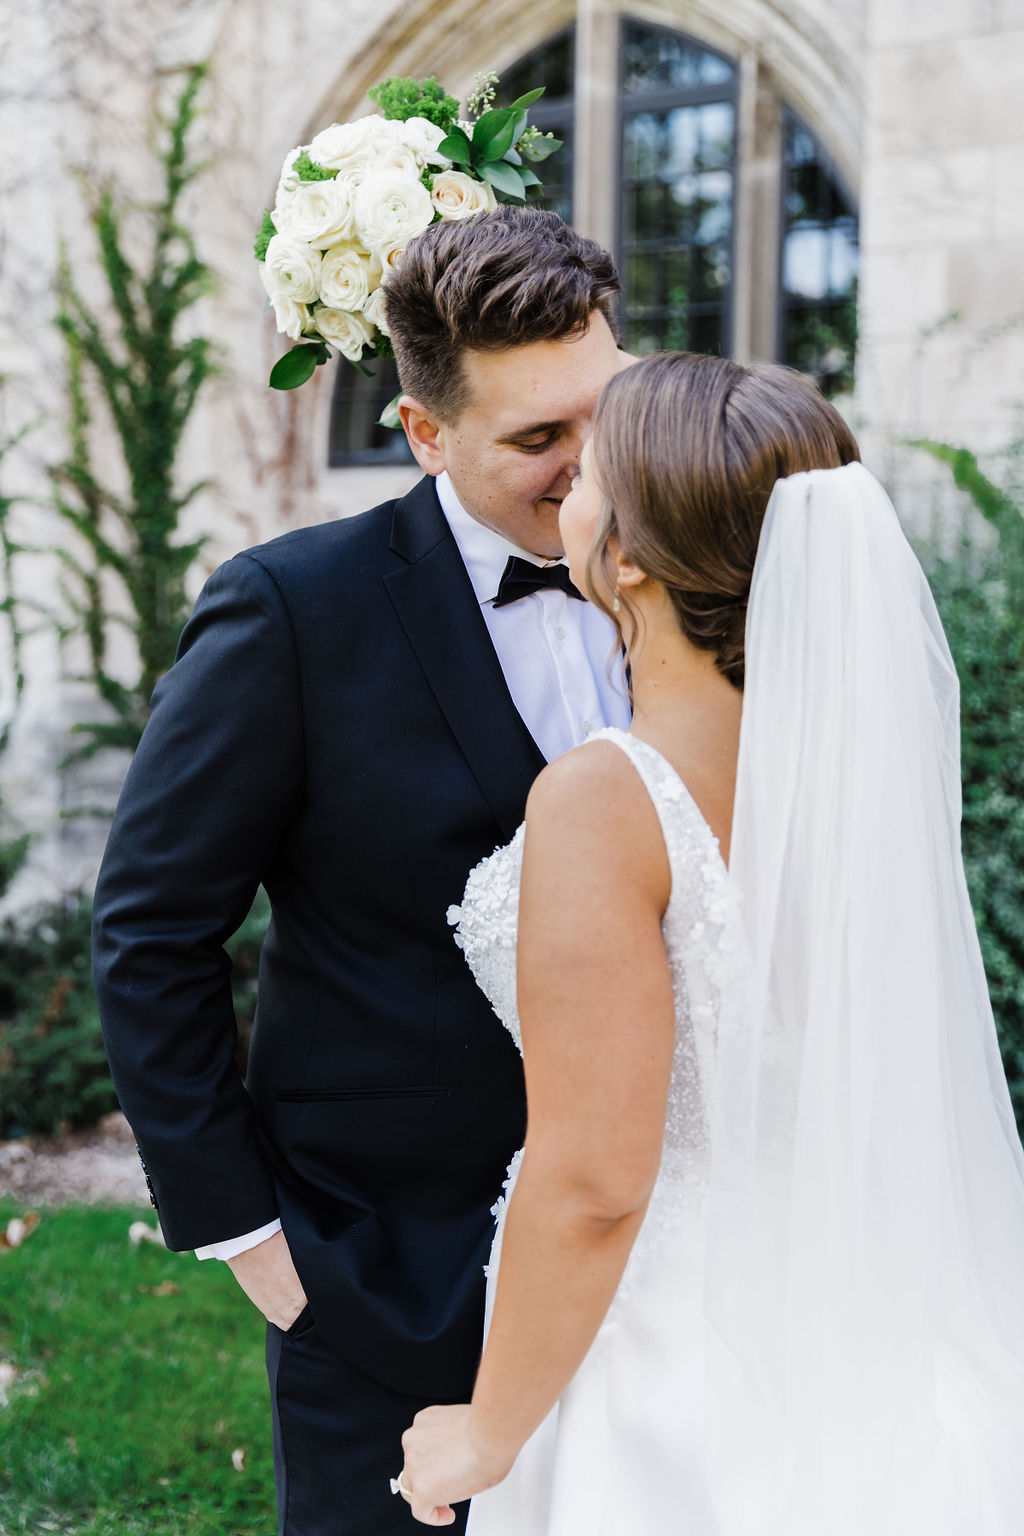 Choosing a wedding photographer is a big deal – they're capturing memories you'll cherish forever! Here's what to consider before making your decision: